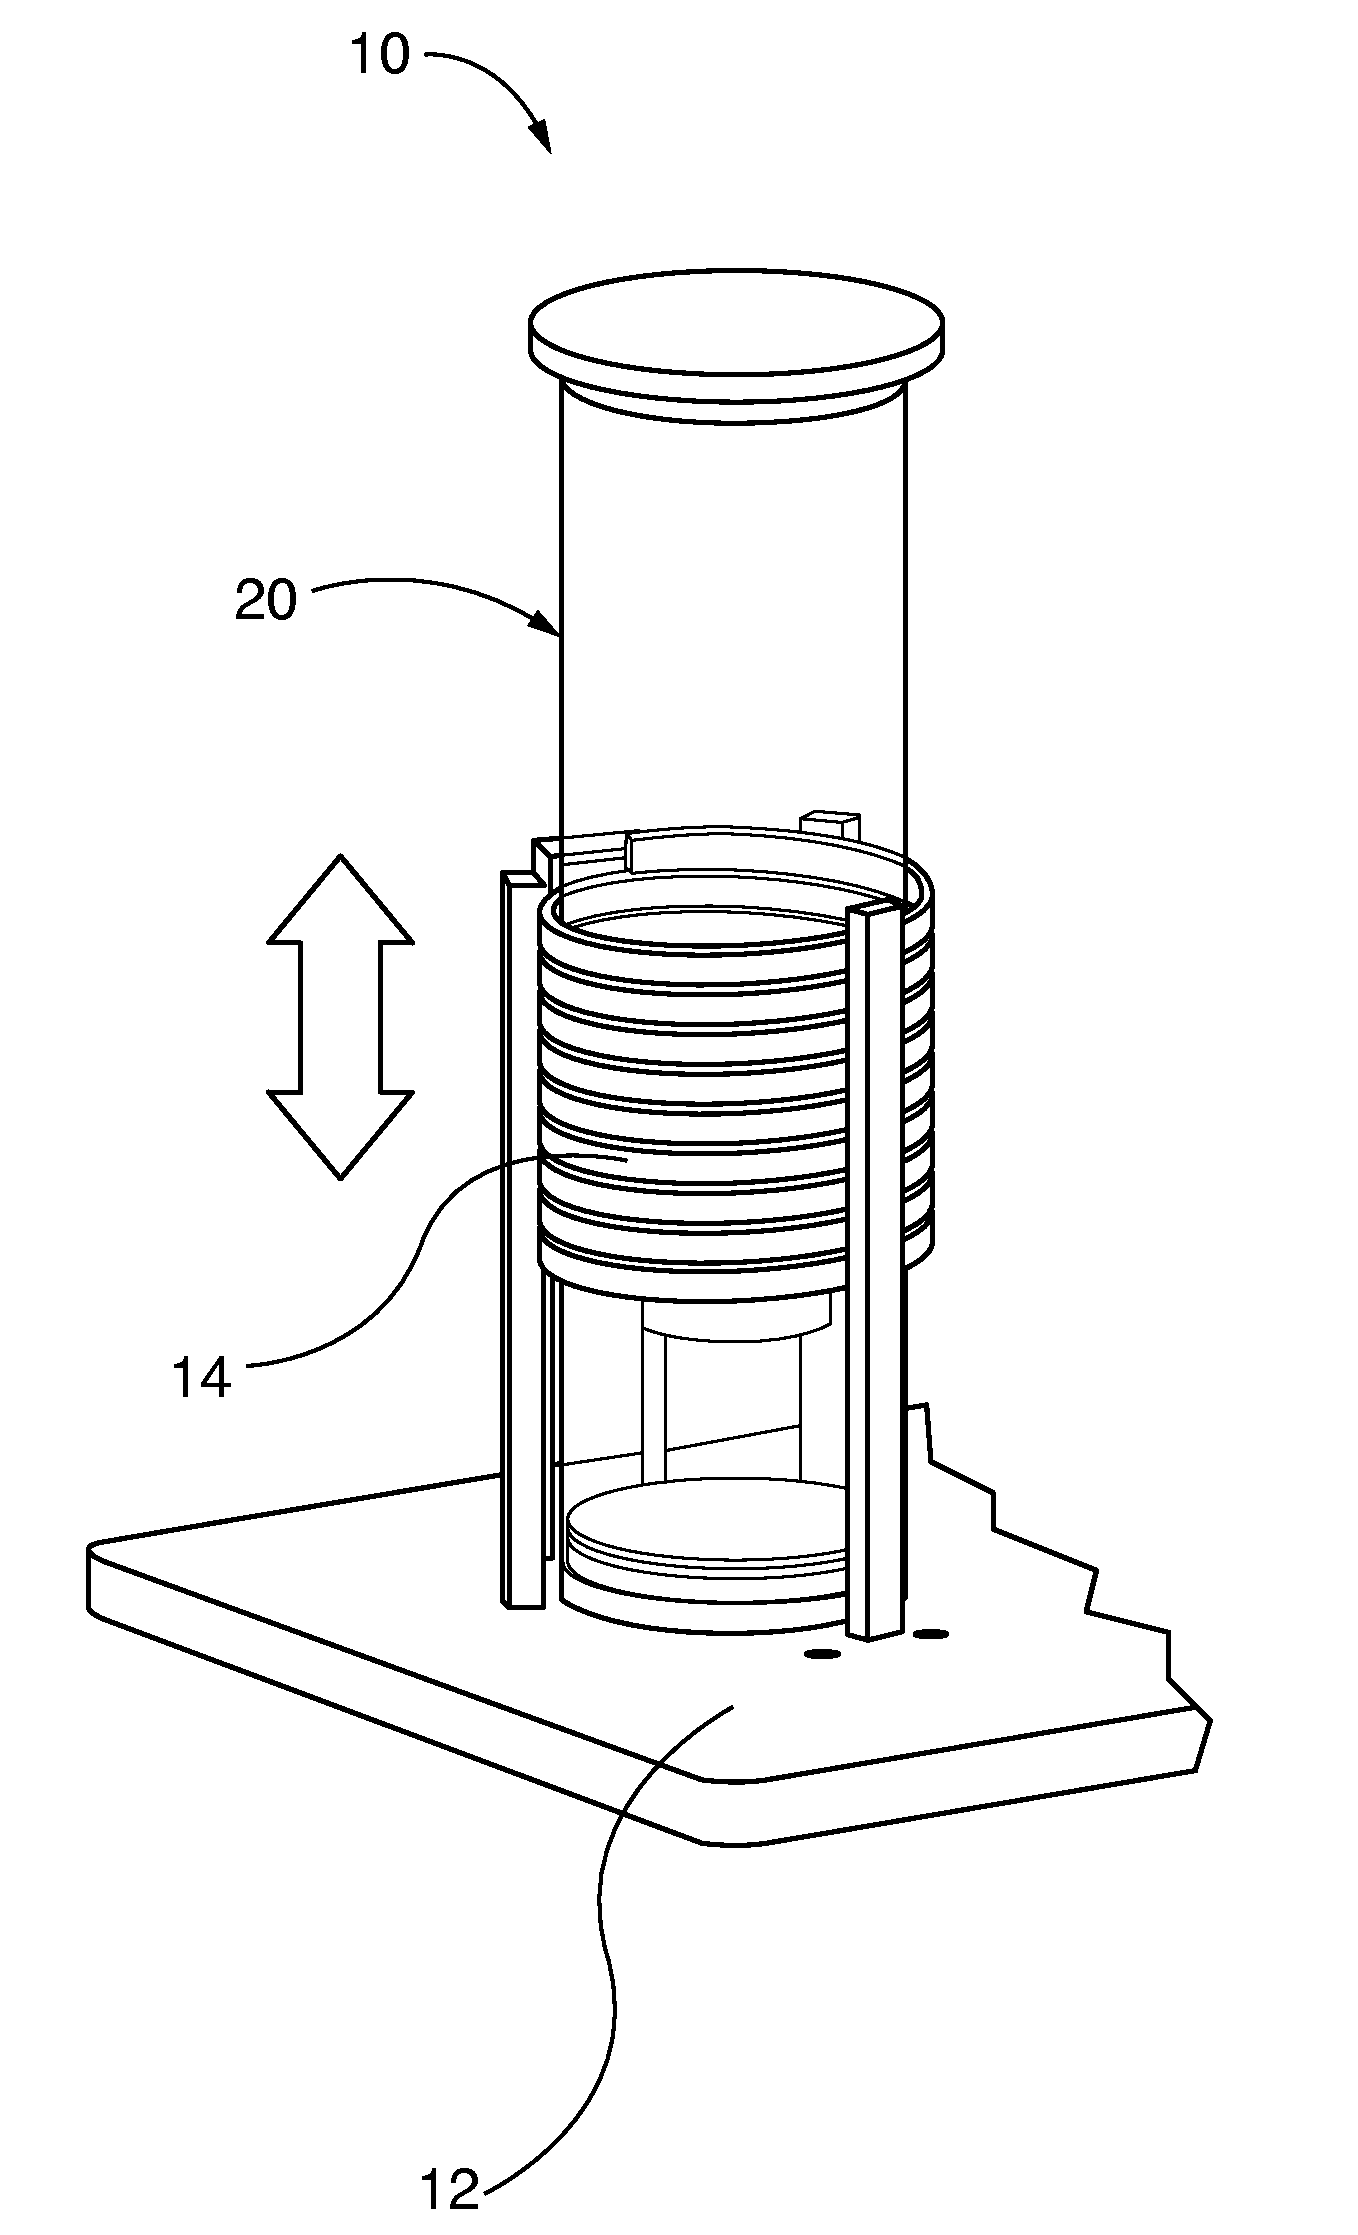 Crystal Growth Chamber With O-Ring Seal For Czochralski Growth Station